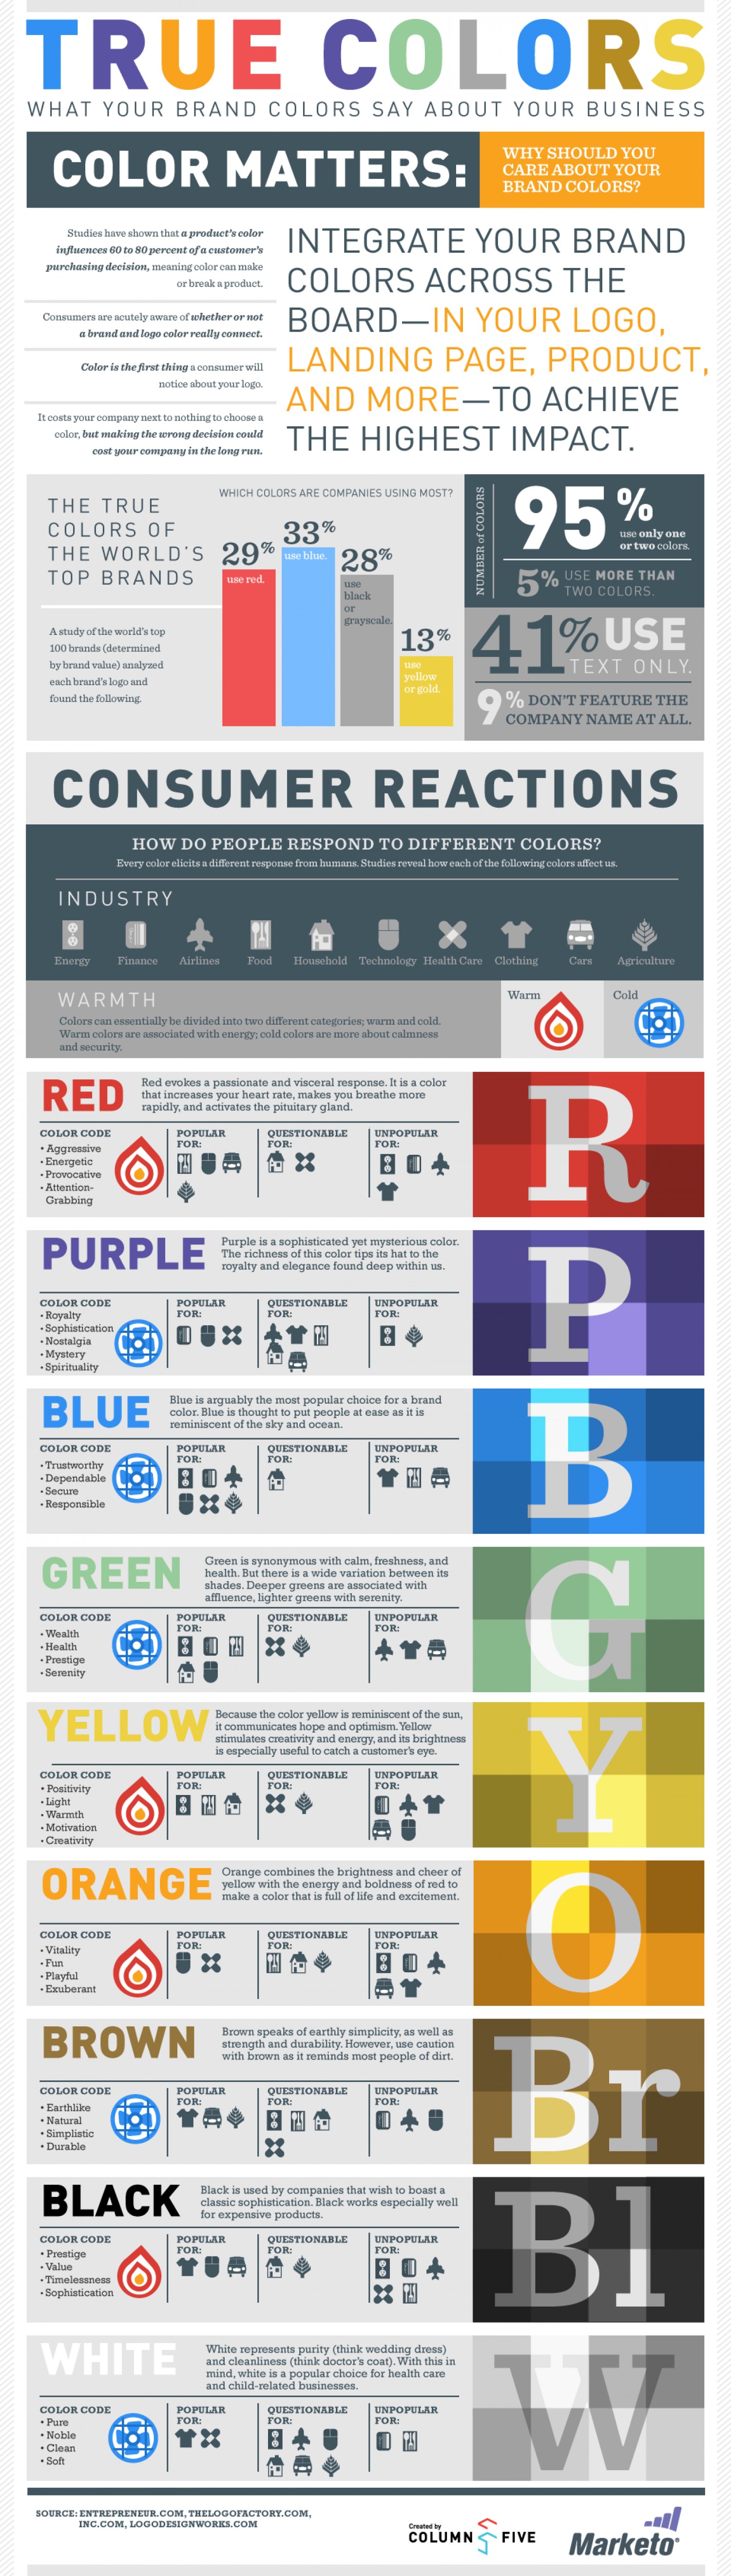 True Colors: What Your Brand Colors Say About Your Business